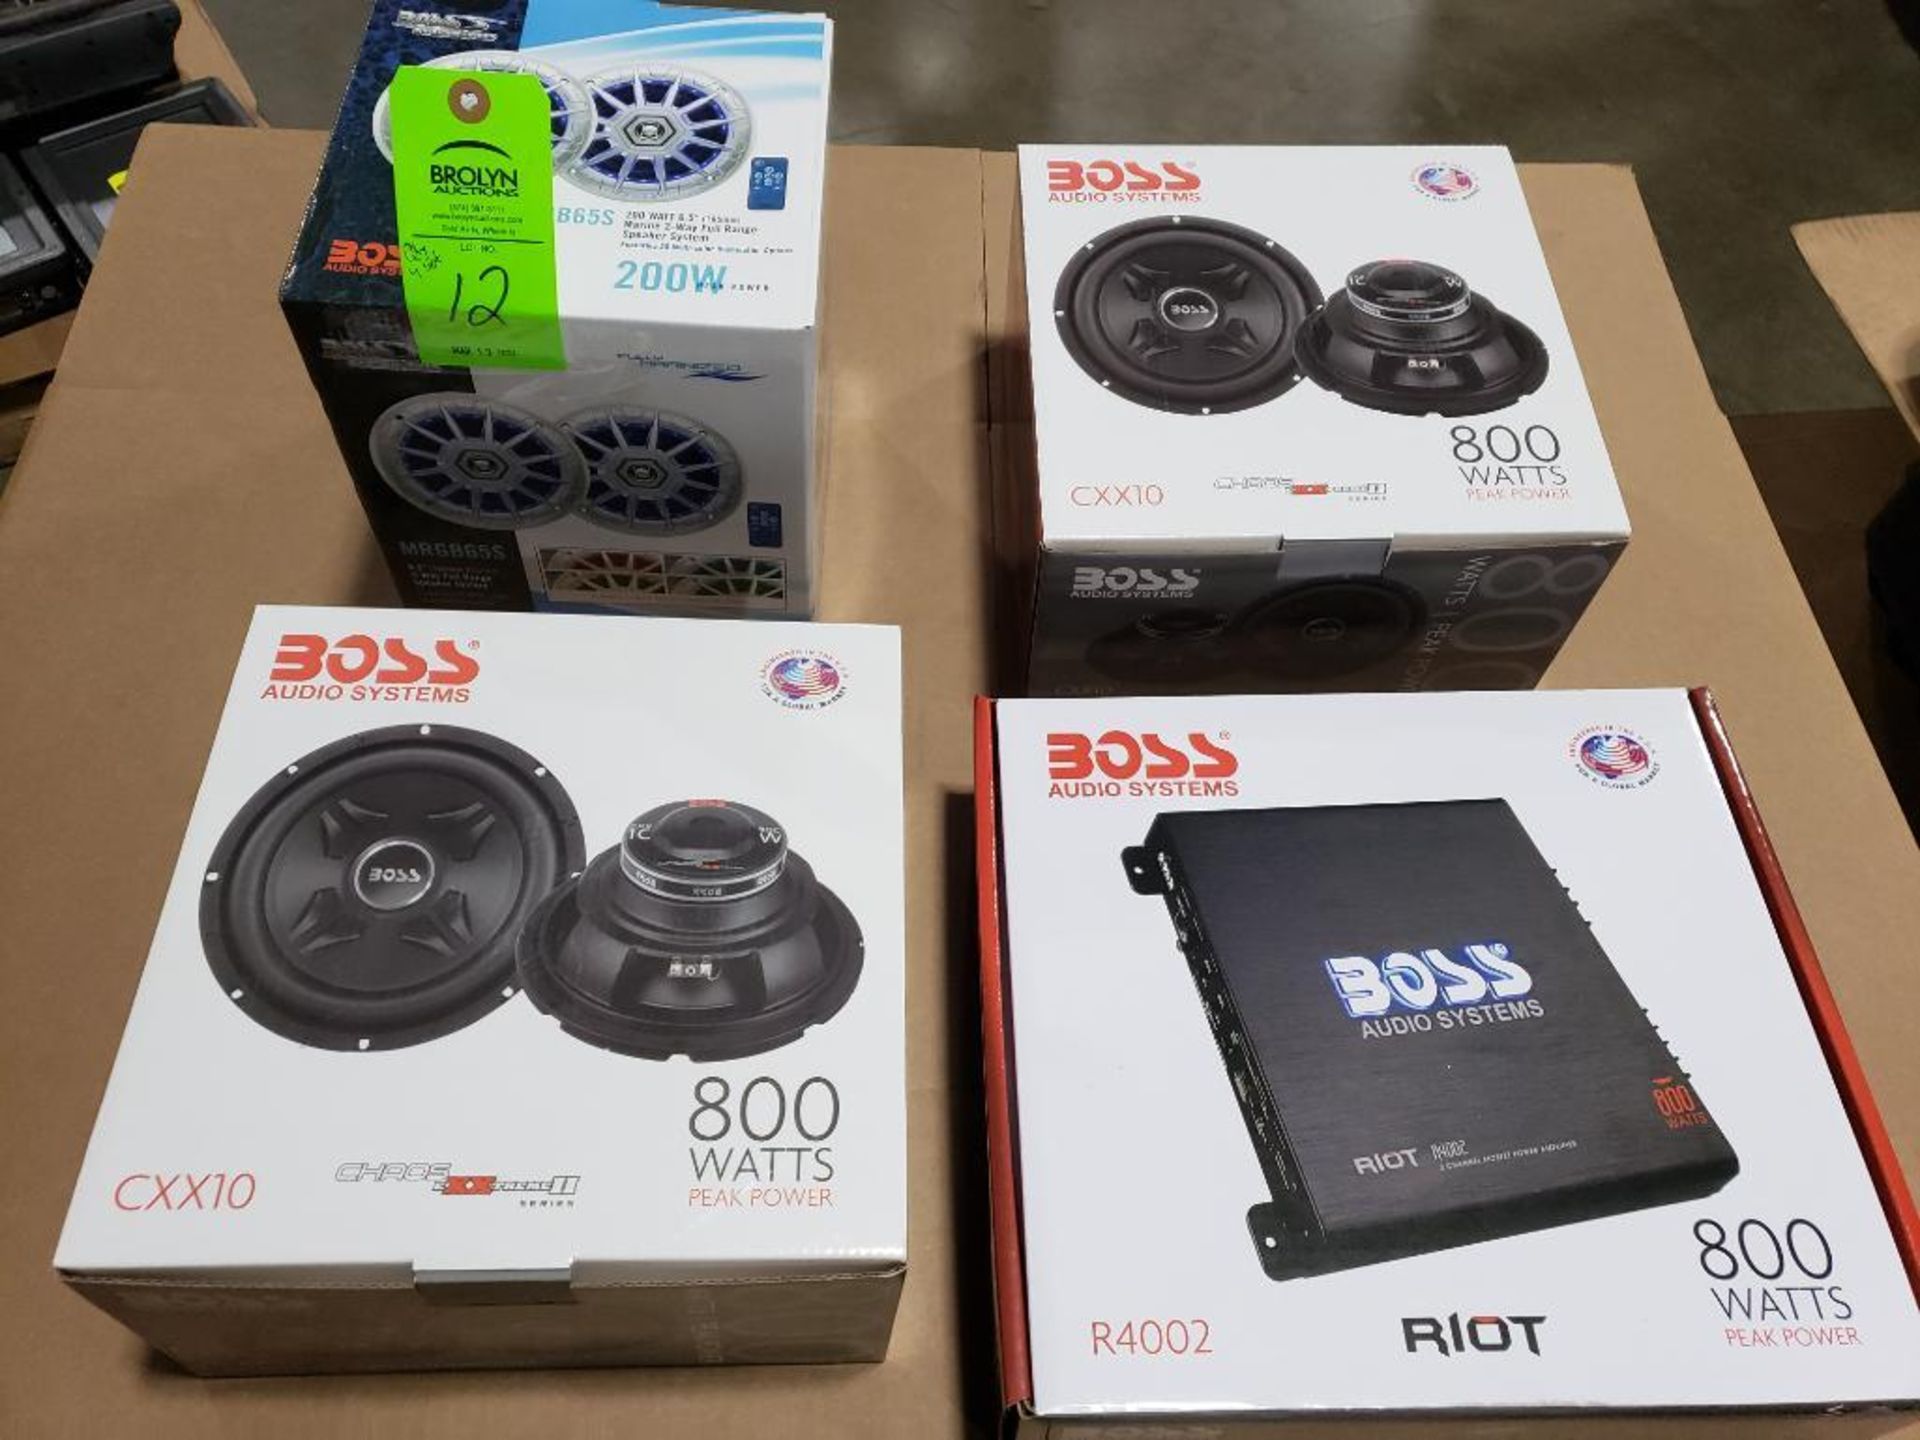 Qty 4 - 3 pairs of assorted Boss speakers and one Boss amp. - Image 11 of 11